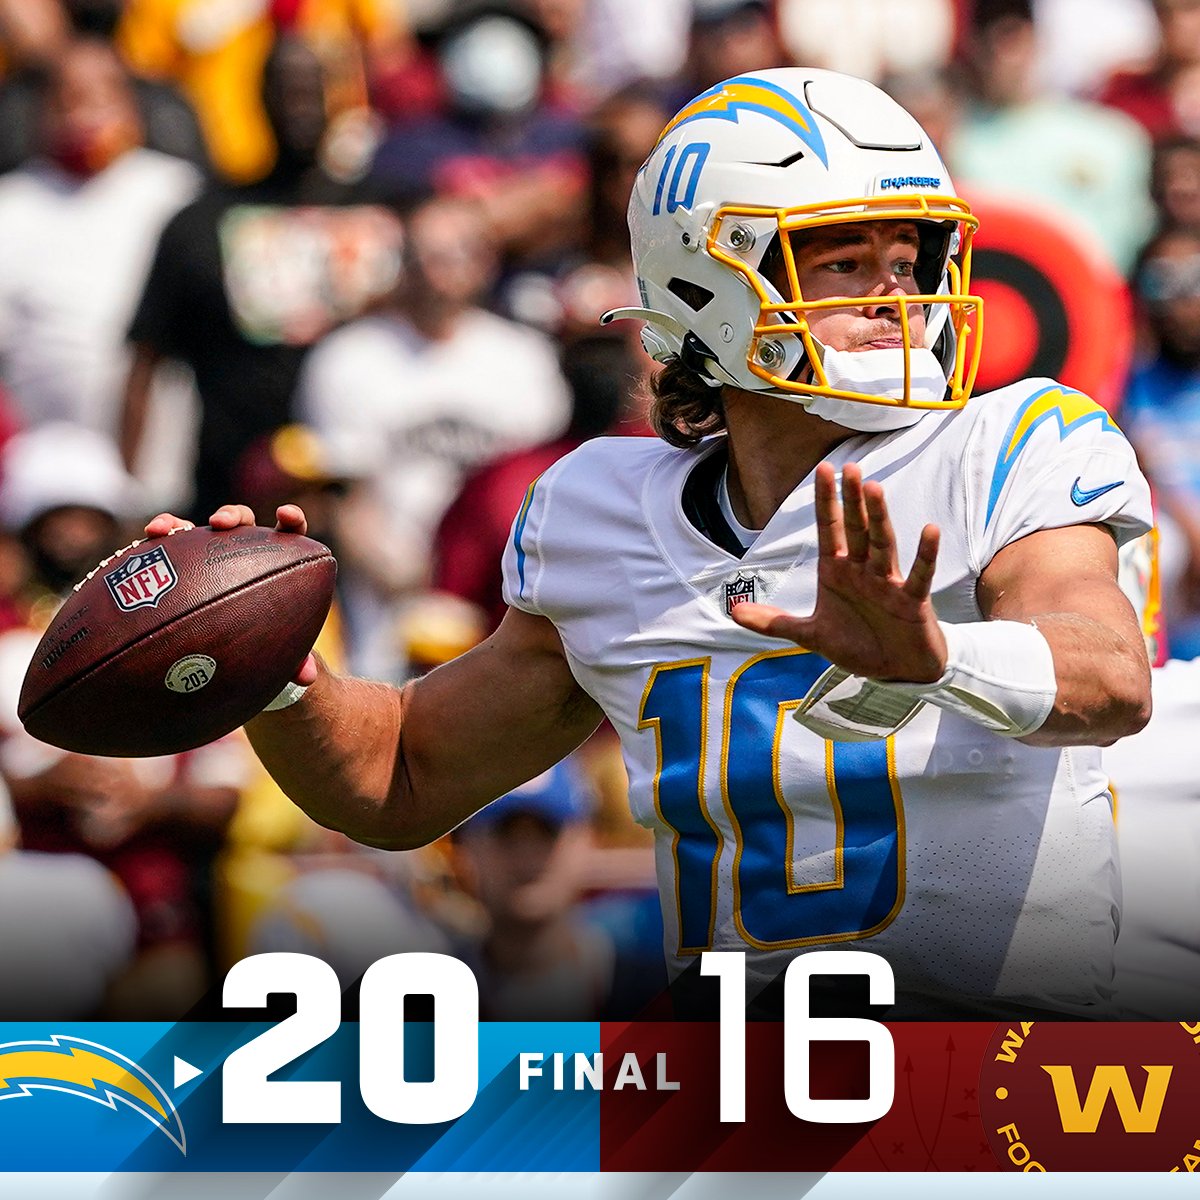 RT @NFL: FINAL: The @Chargers start 1-0! #LACvsWAS https://t.co/f69wmX7fxL